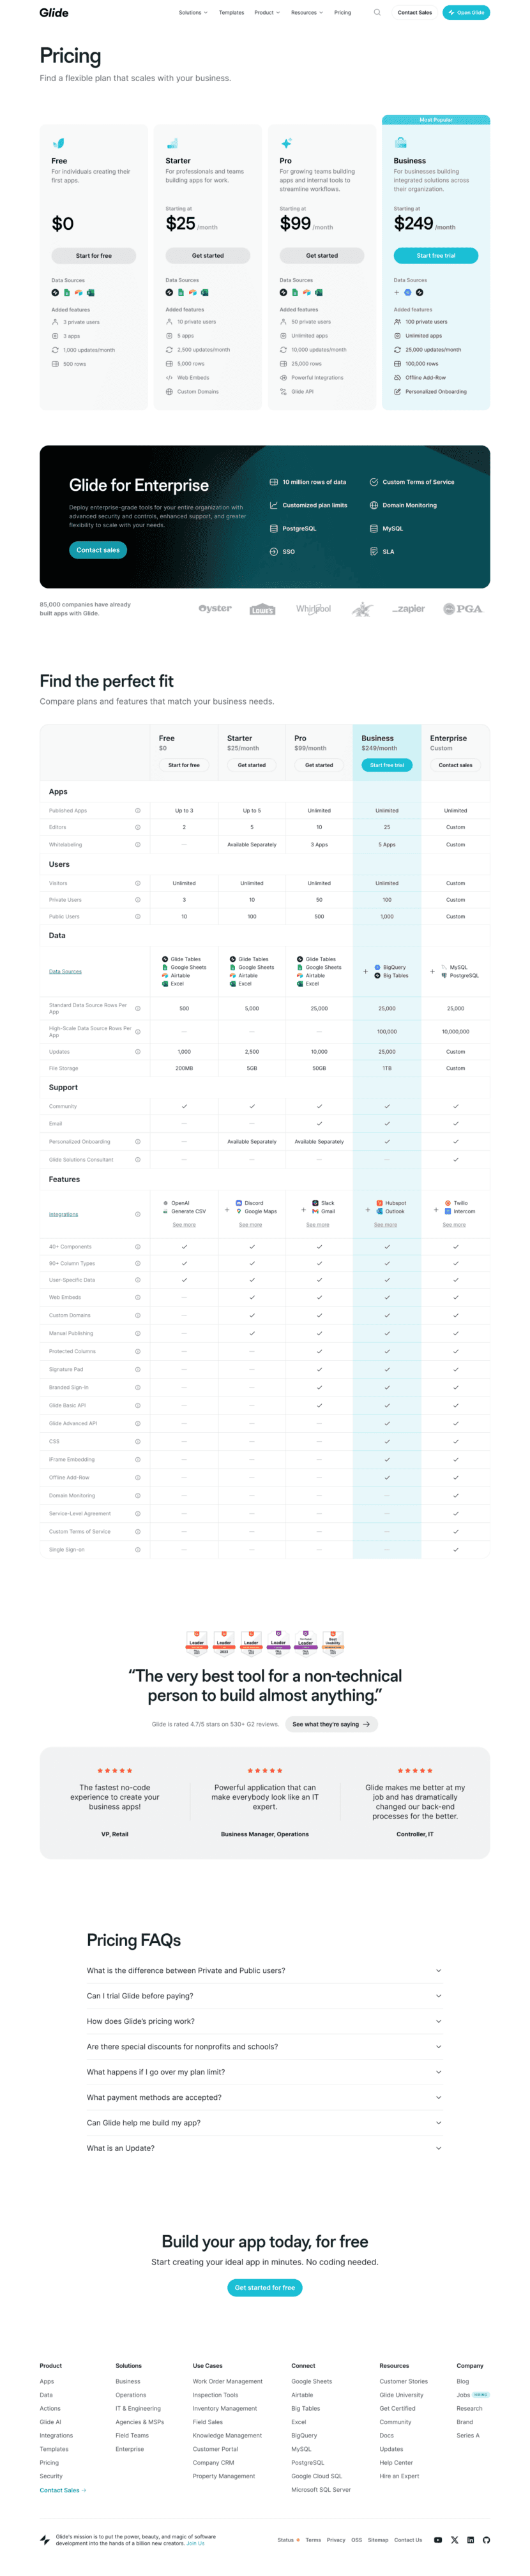 glide pricing page